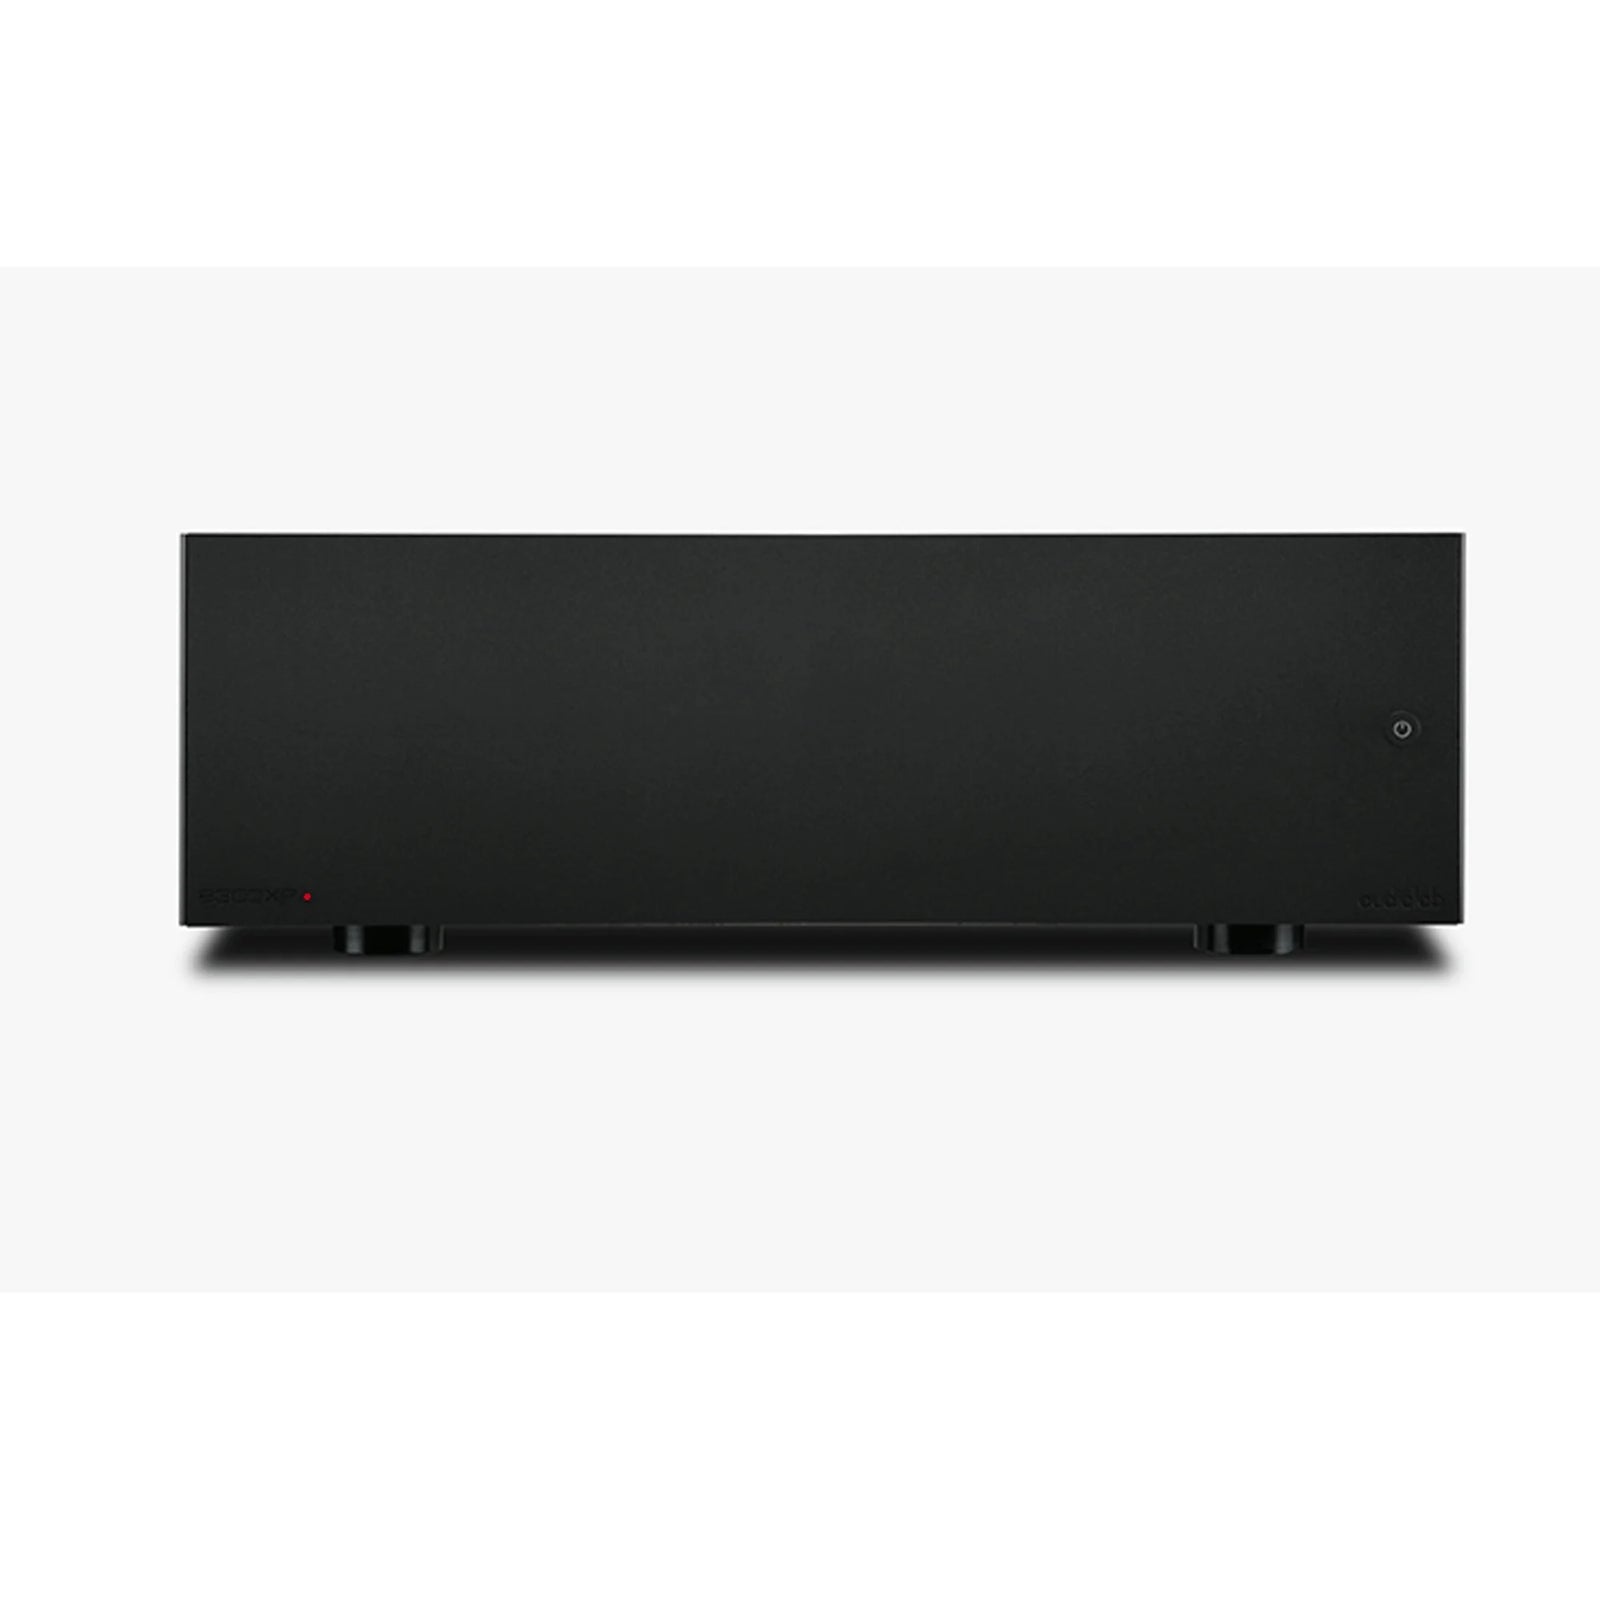 The 8300XP is a classic audiolab stereo power amplifier, with a sound as clean and crisp as its minimalist exterior. Delivering 140W per channel into 8 Ohms, the 8300XP is capable of driving even the toughest of loudspeakers with sure-footed authority, combining audiolab’s class-leading neutrality with an unerring ability to engage the listener throughout a musical performance.